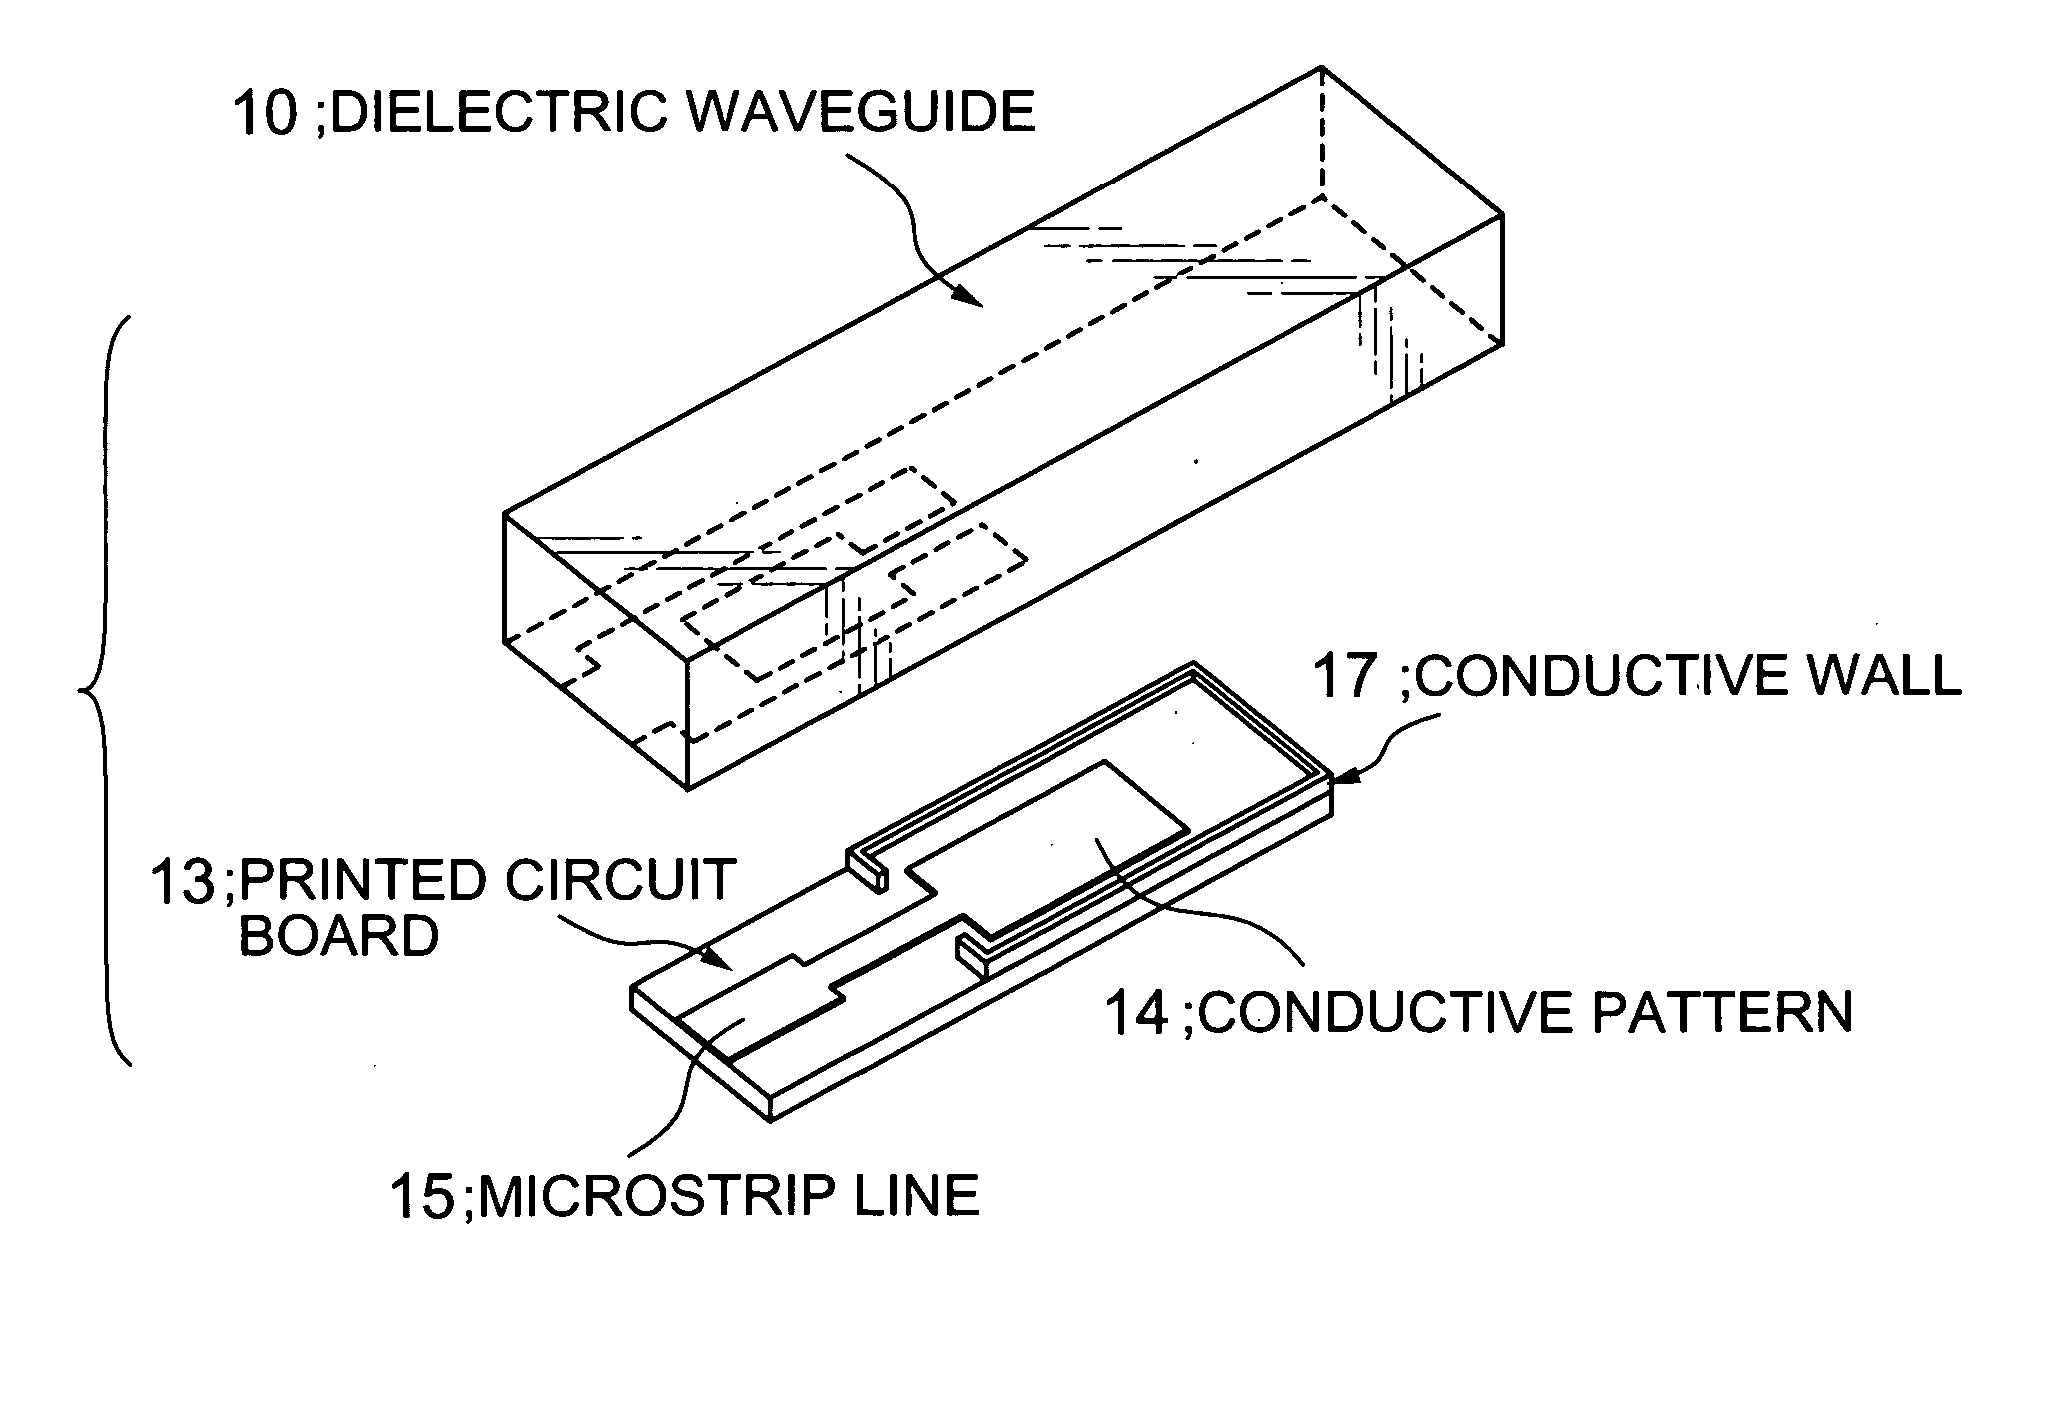 Input/output coupling structure for dielectric waveguide